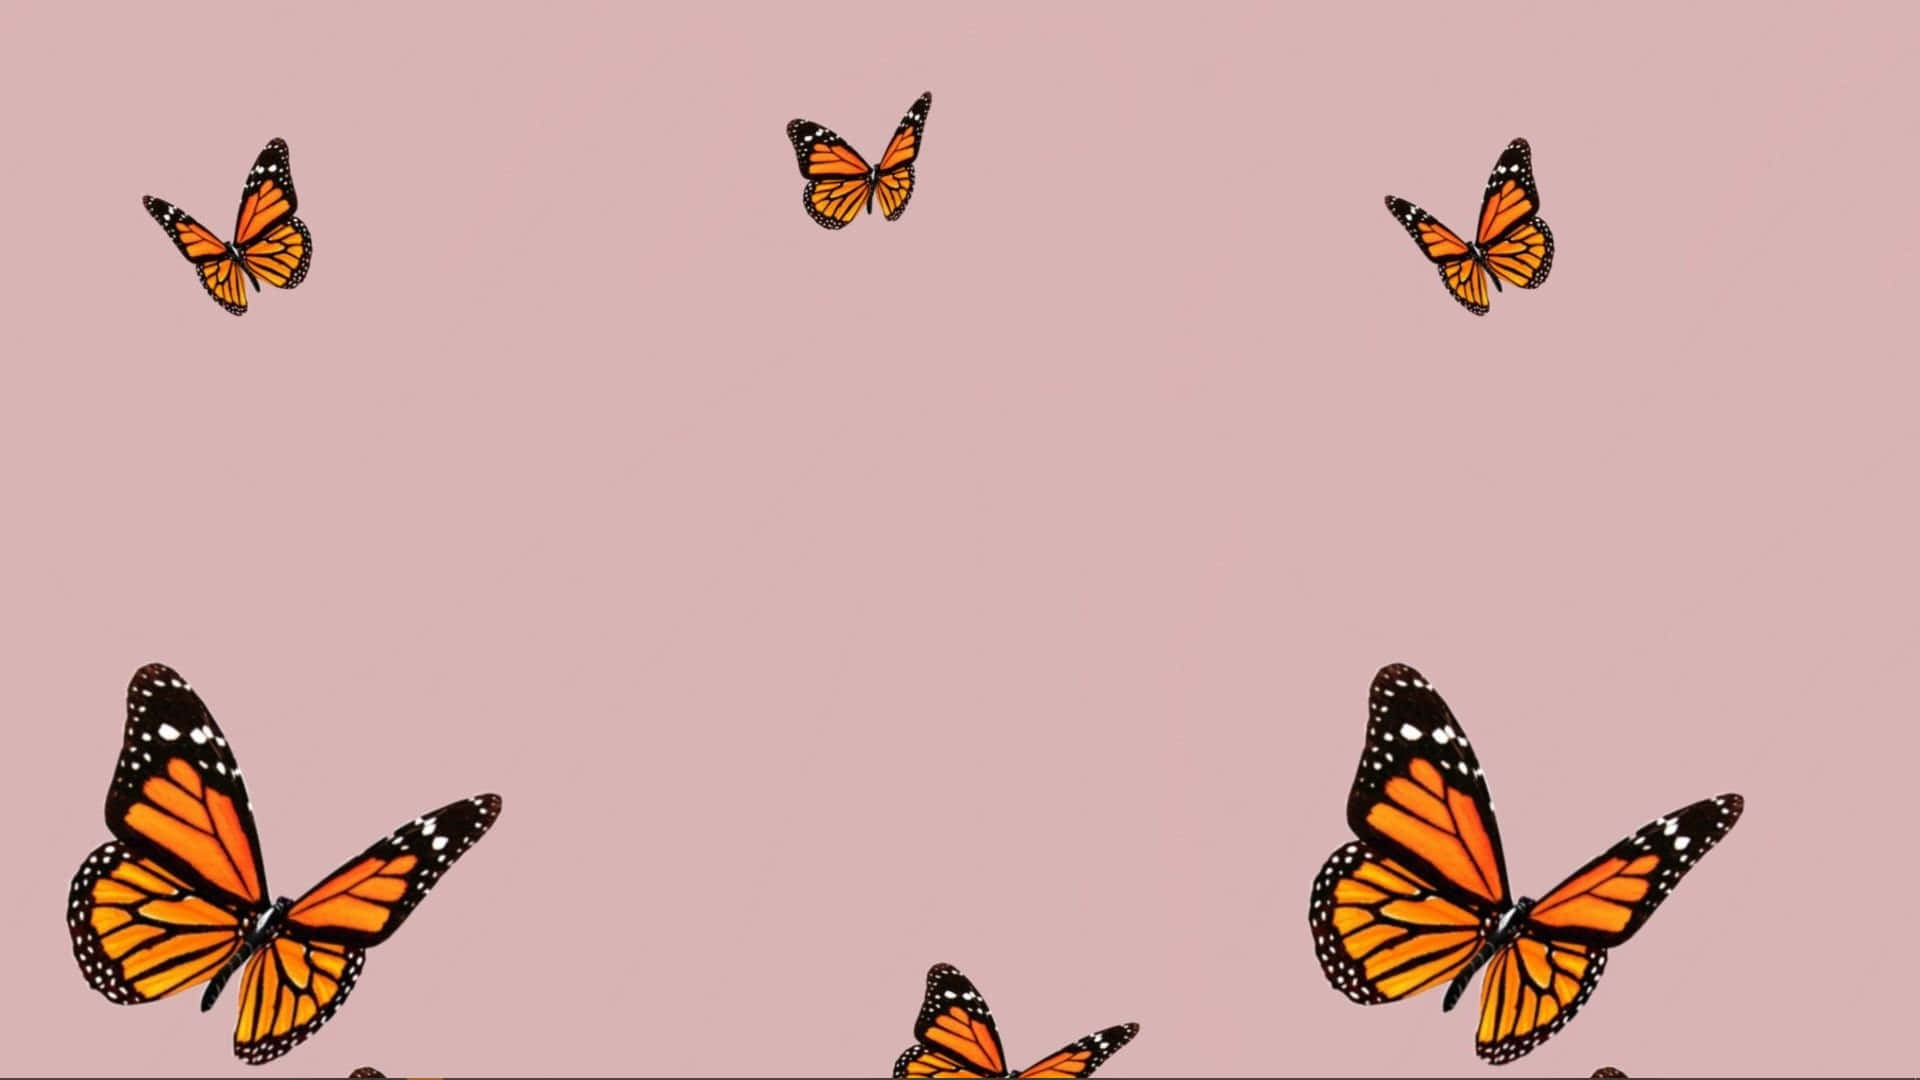 A colorful and ornate laptop, featuring vivid patterns of butterflies Wallpaper